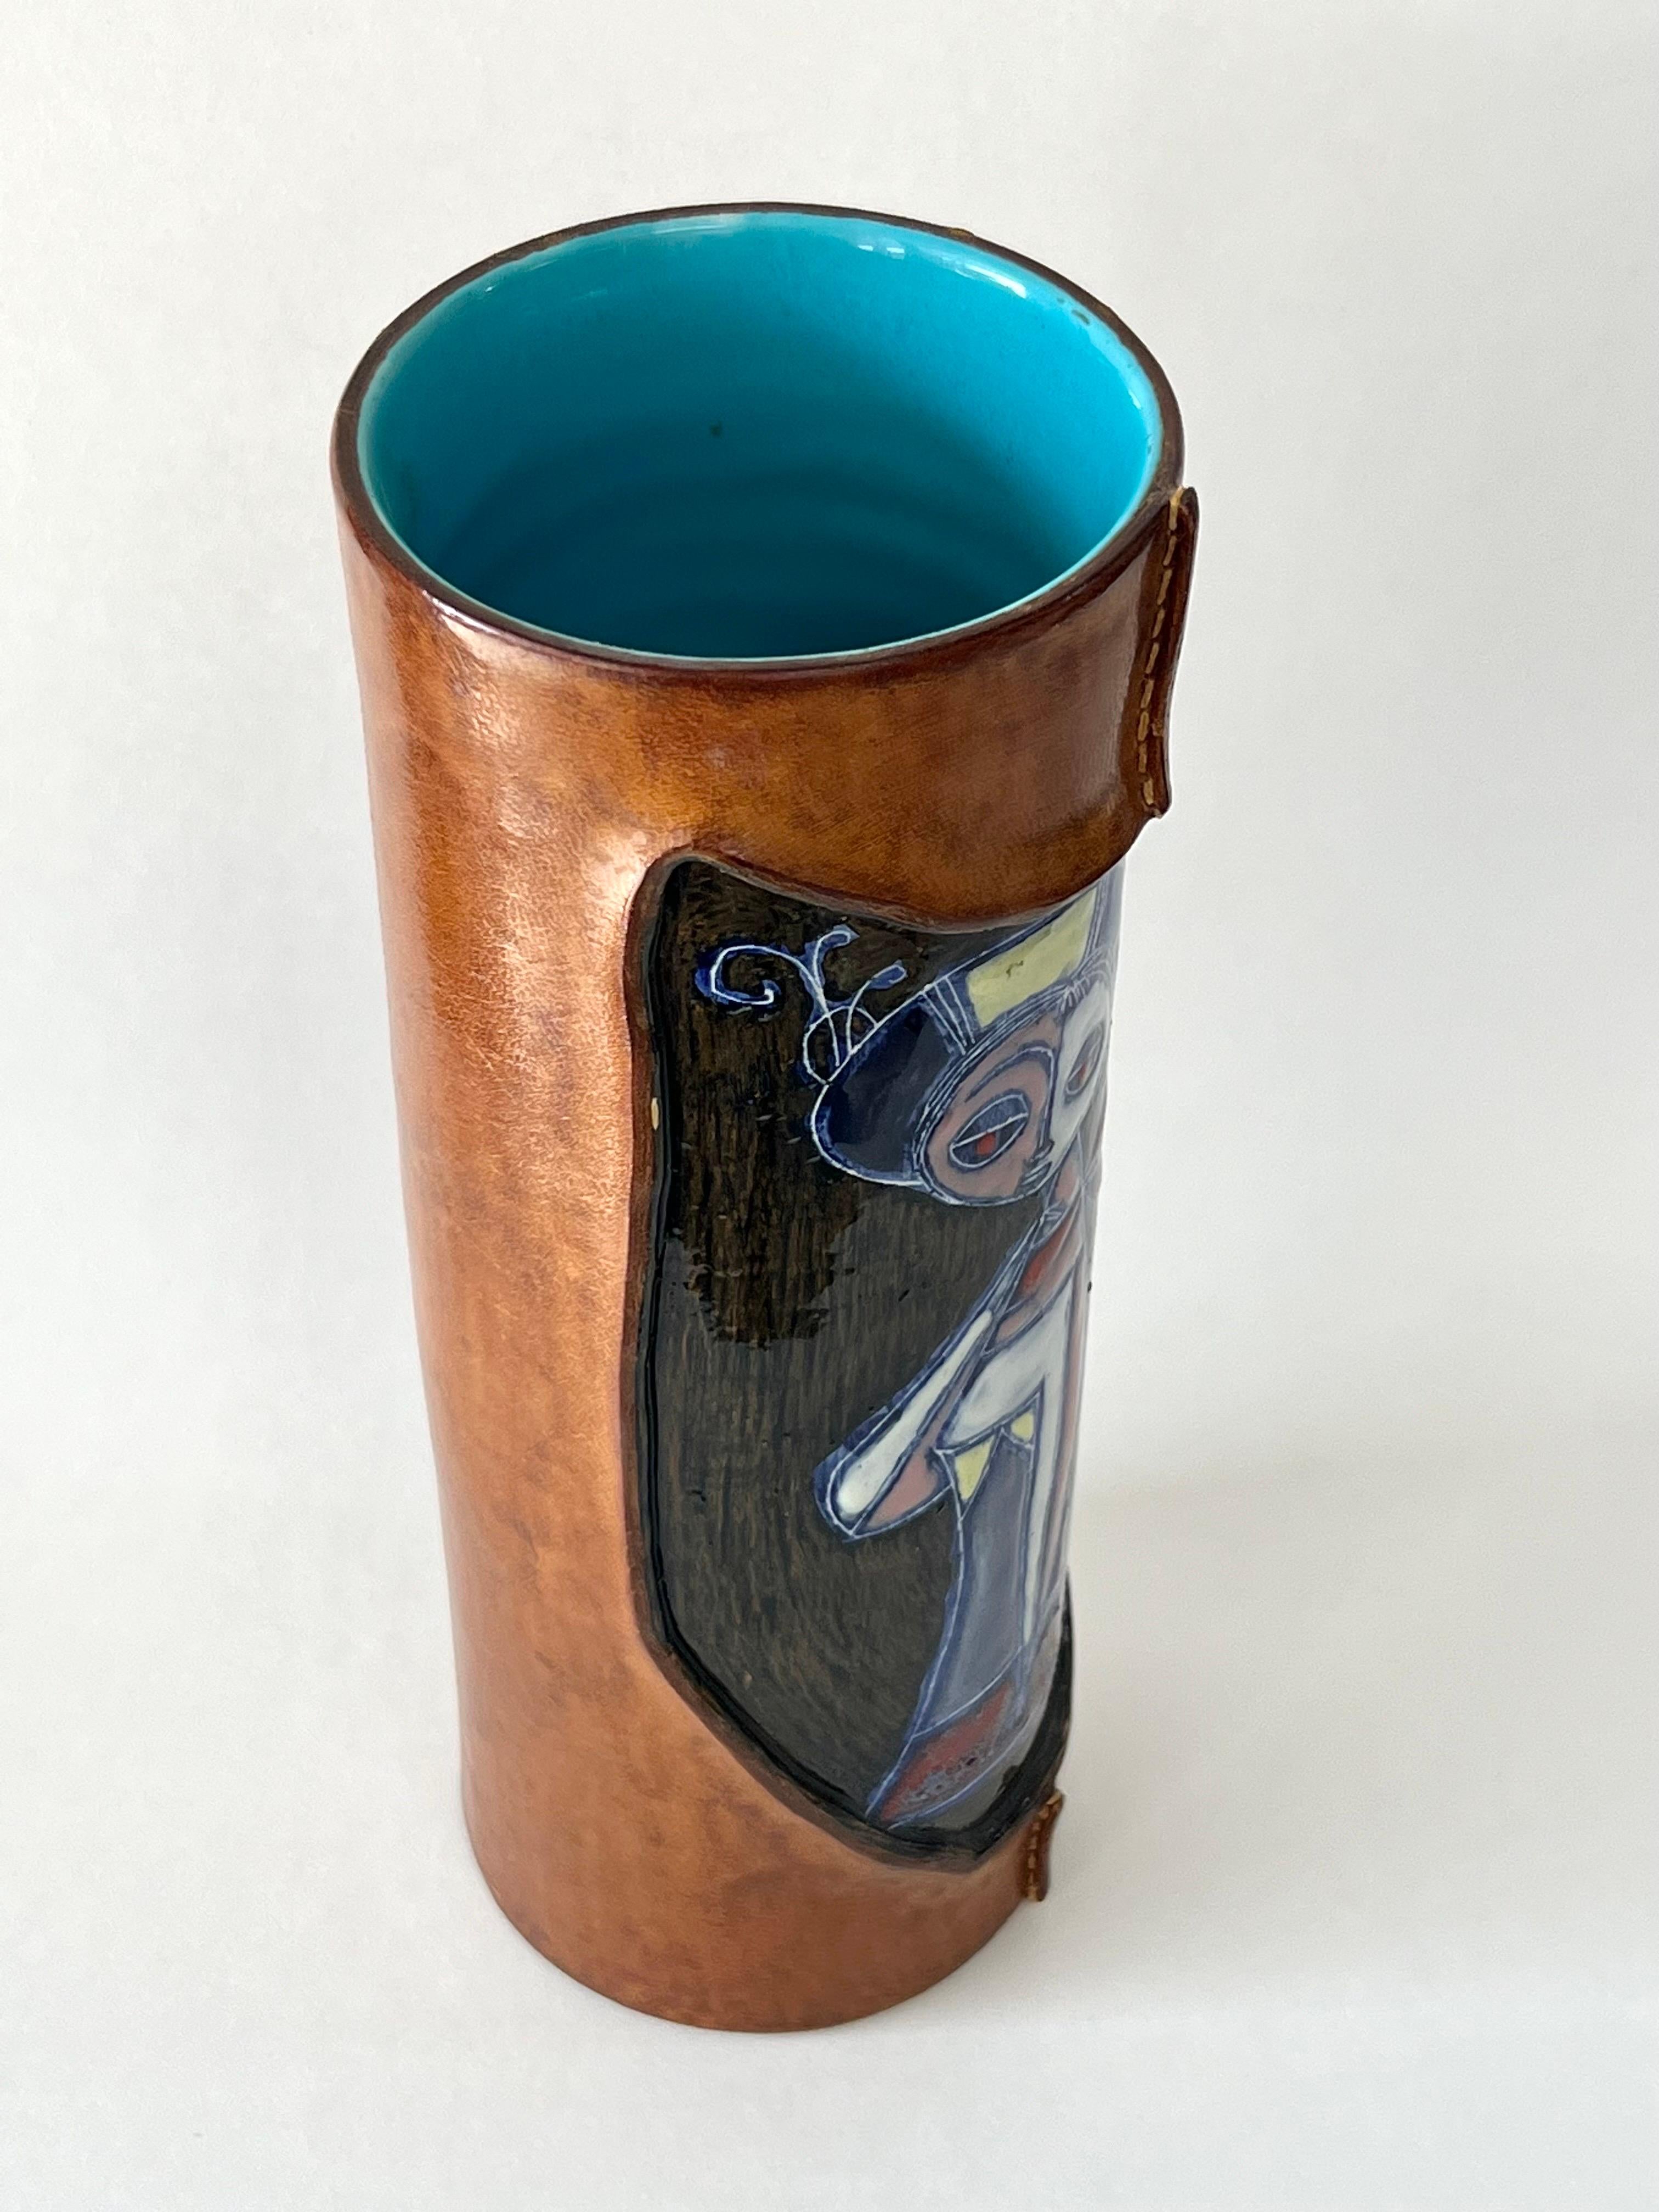 Marcello Fantoni Abstract Ceramic Vase with Leather In Good Condition For Sale In Miami, FL